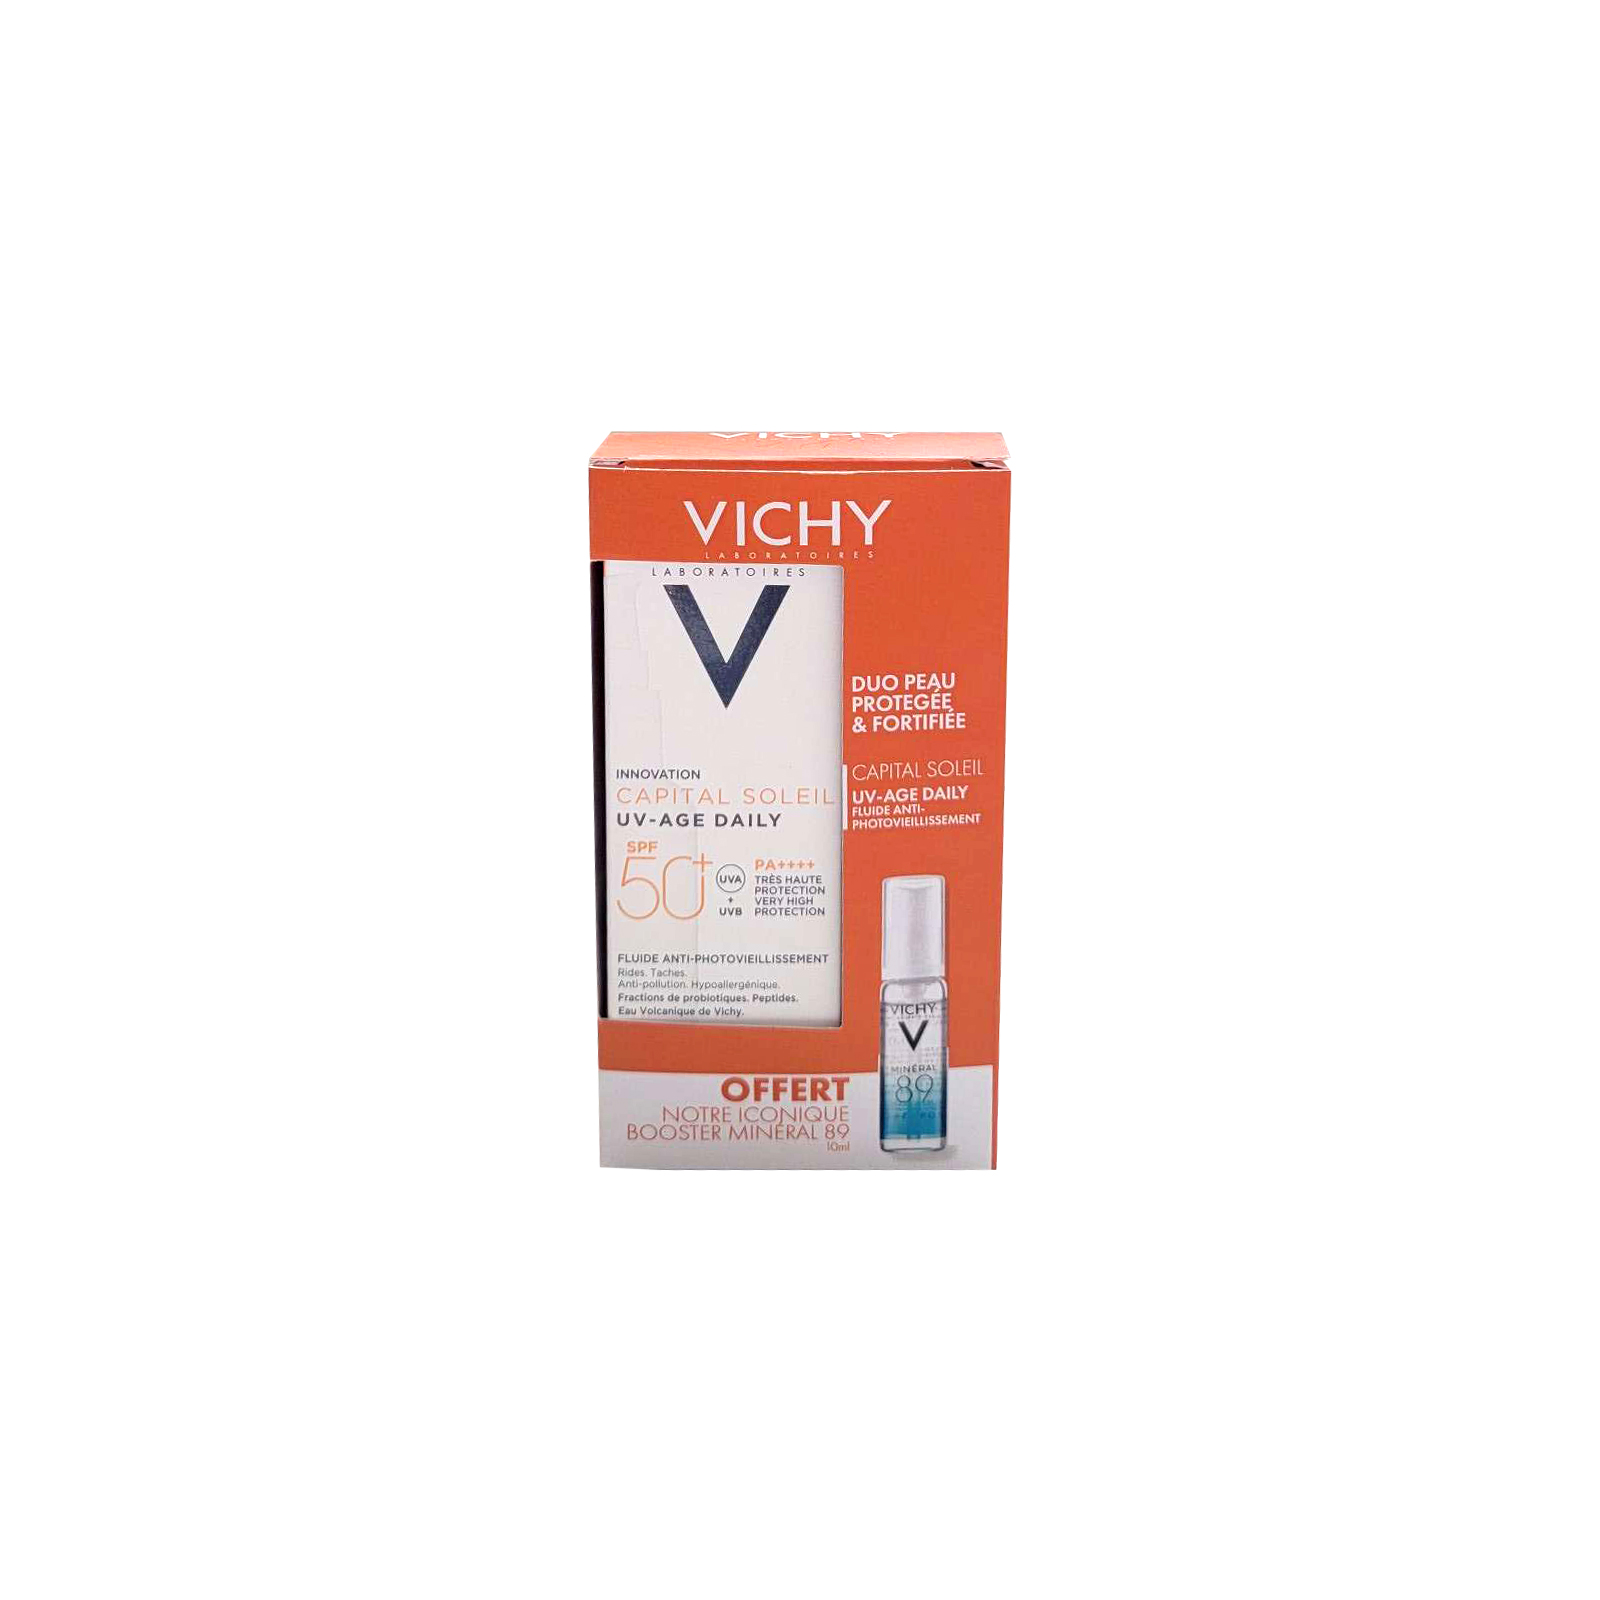 VICHY PACK PROMOTIONNEL CAPITAL SOLEIL UV-AGE DAILY SPF50 50ML + MINERAL 89 SERUM BOOSTER 10ML OFFERT